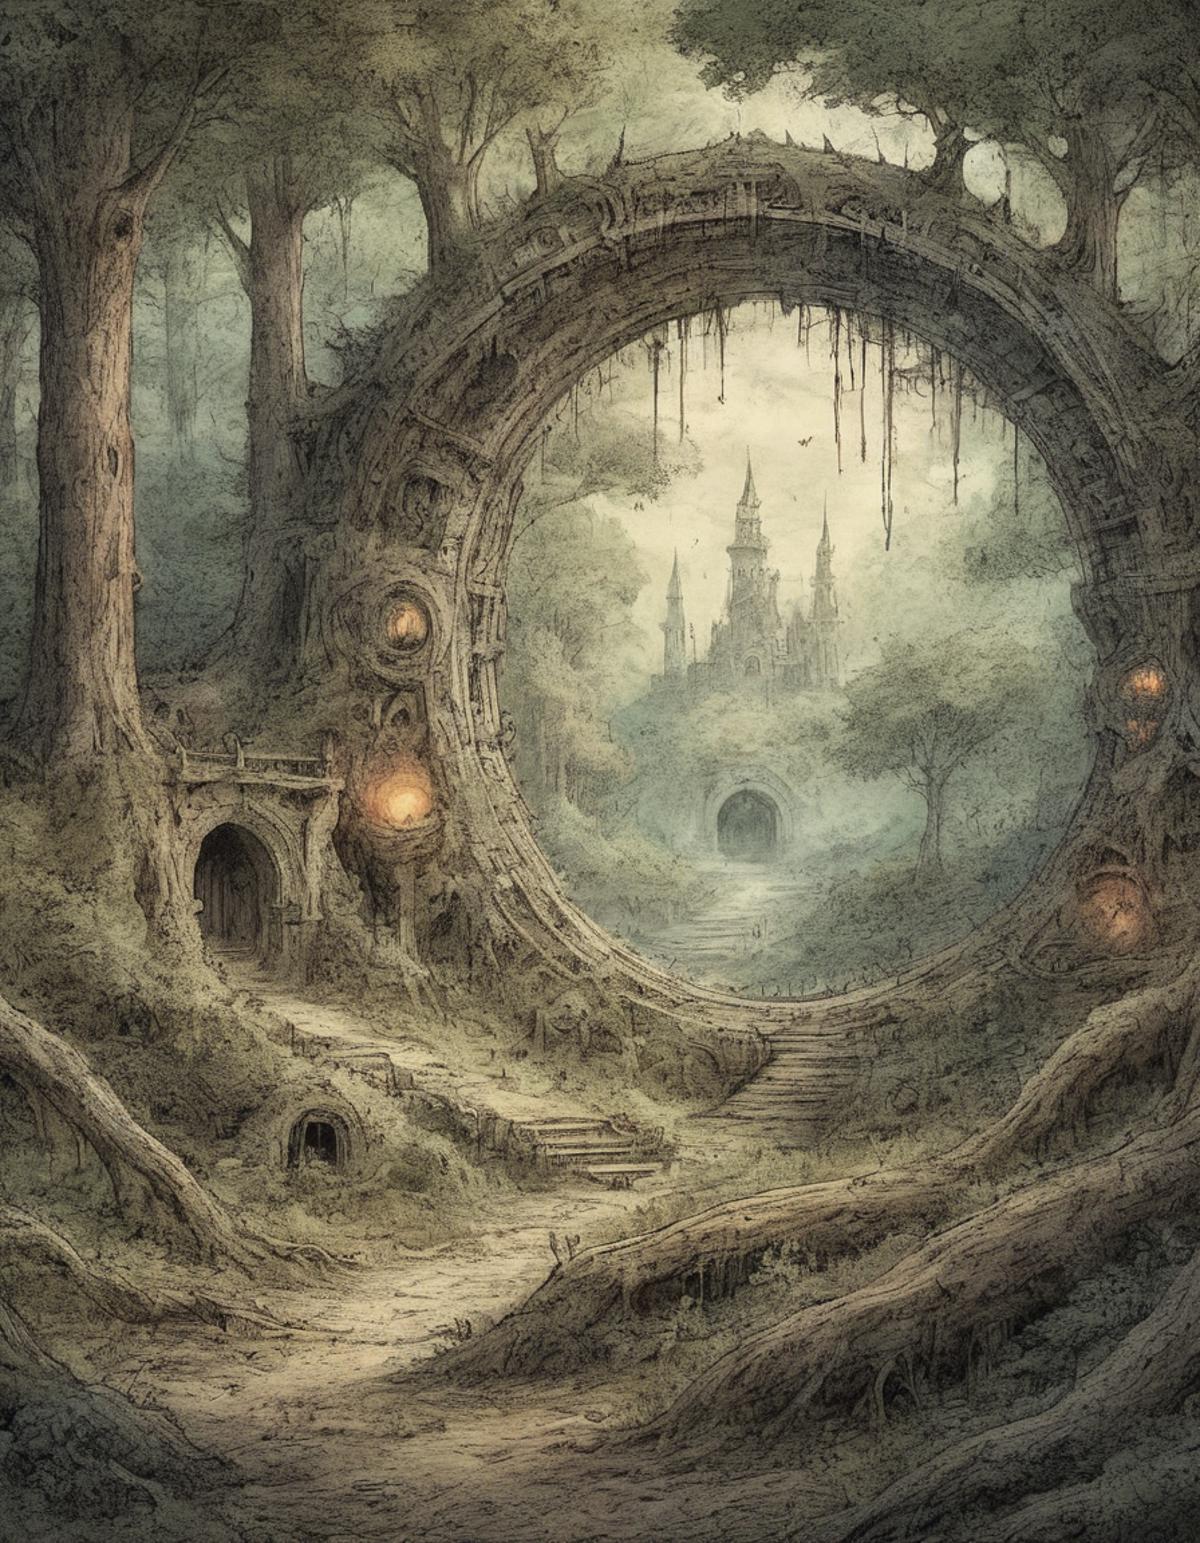 An enchanted forest scene with a giant stone ring, castle, and tree.